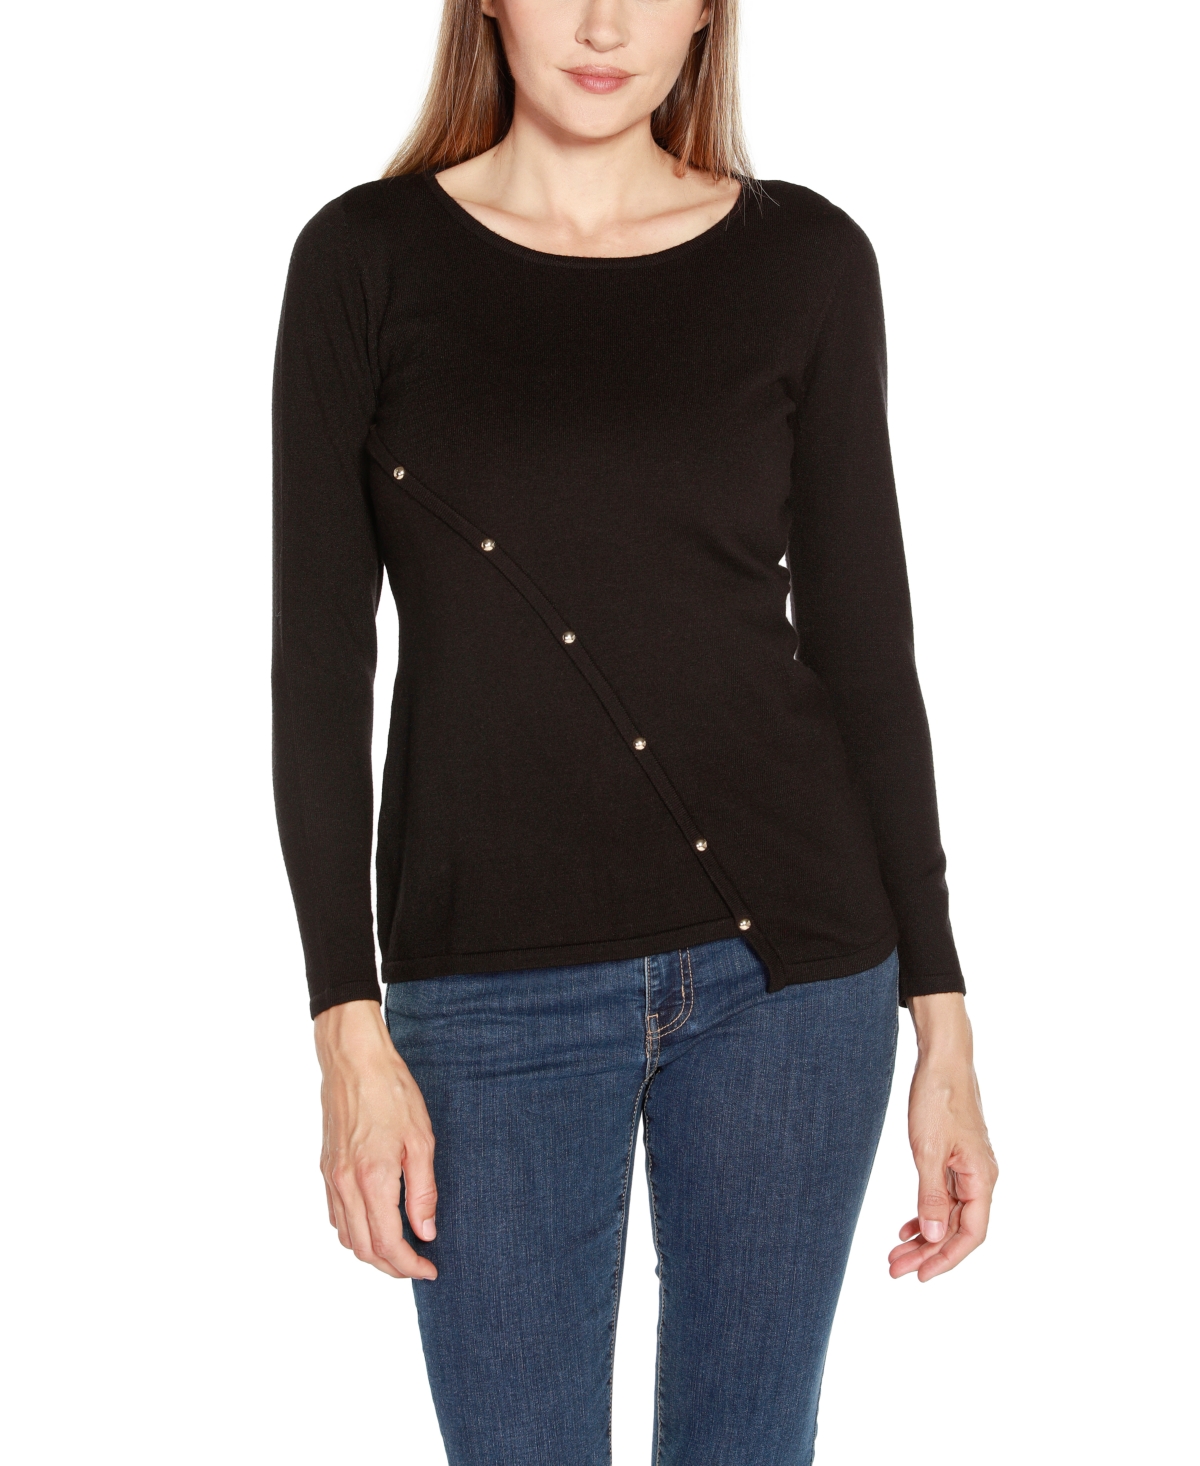 BELLDINI WOMEN'S ASYMMETRICAL CROSSOVER-FRONT SWEATER